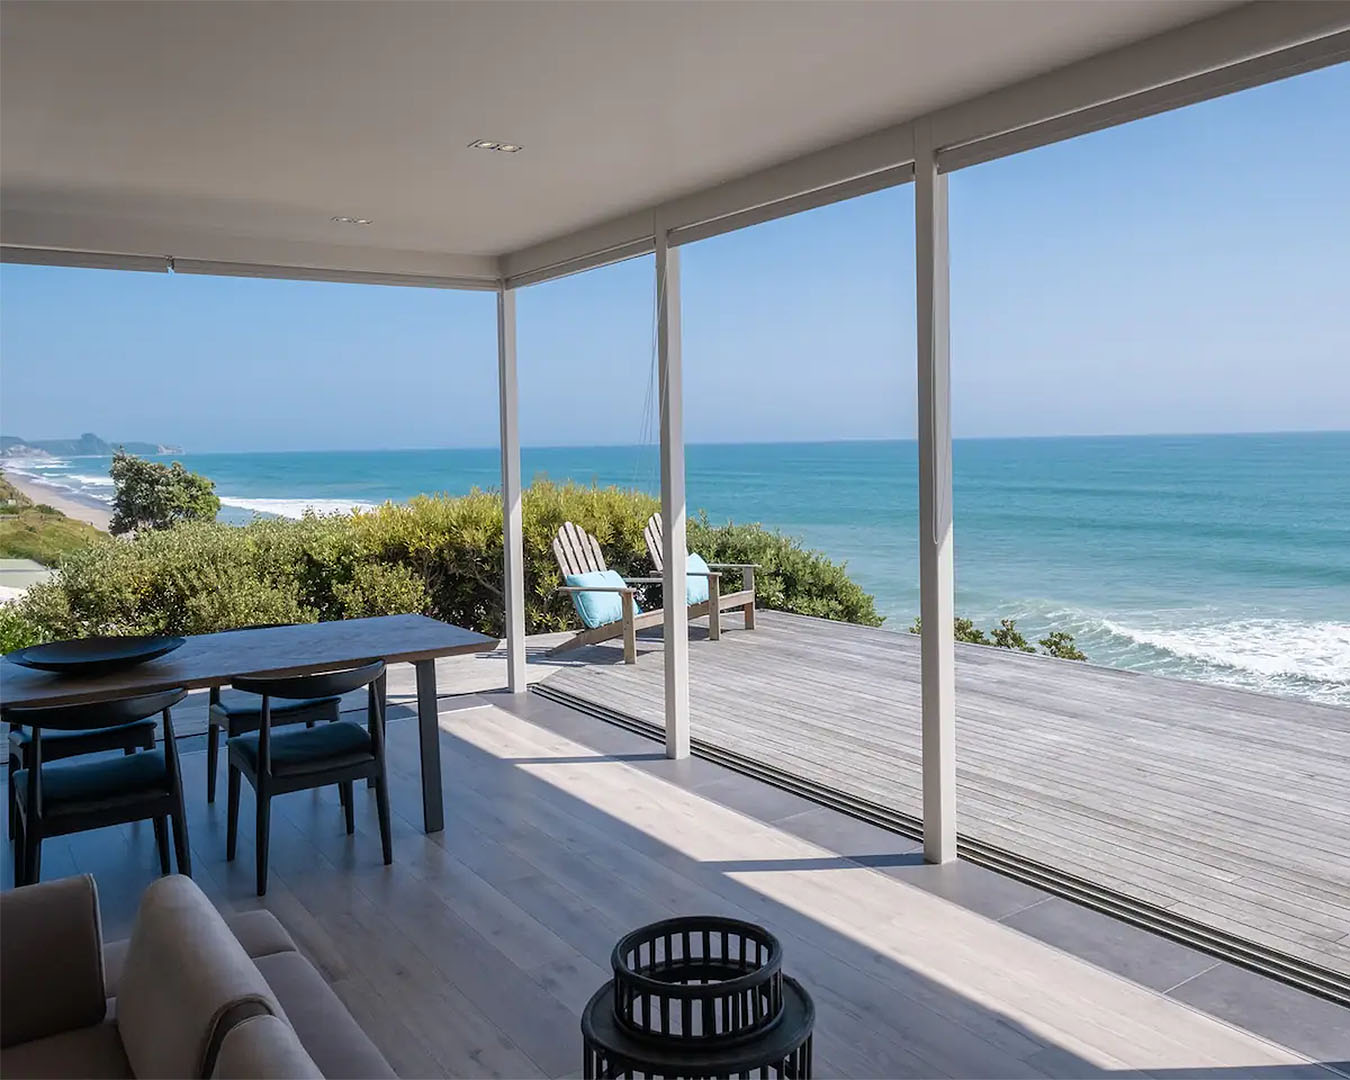 A stunning view from the deck shows blue surf with chairs and comfy sitting areas.